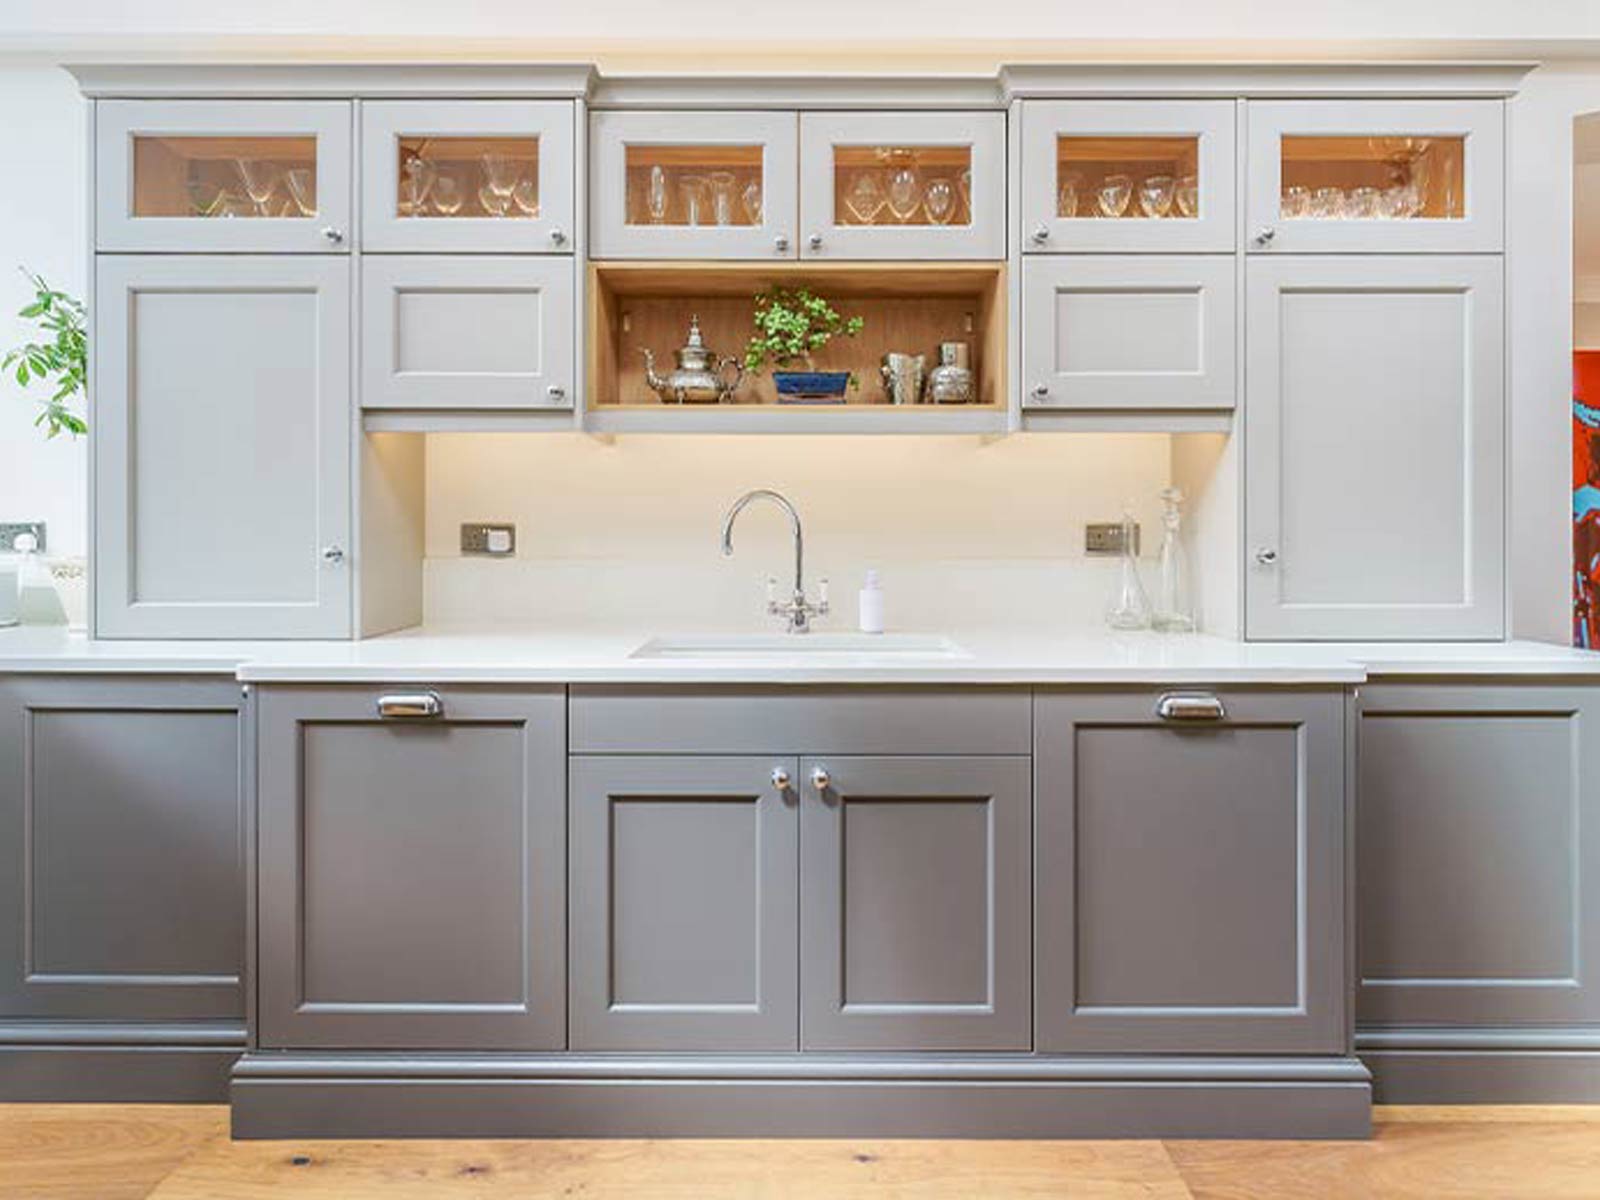 6 Design Ideas For Gray Kitchen Cabinets 